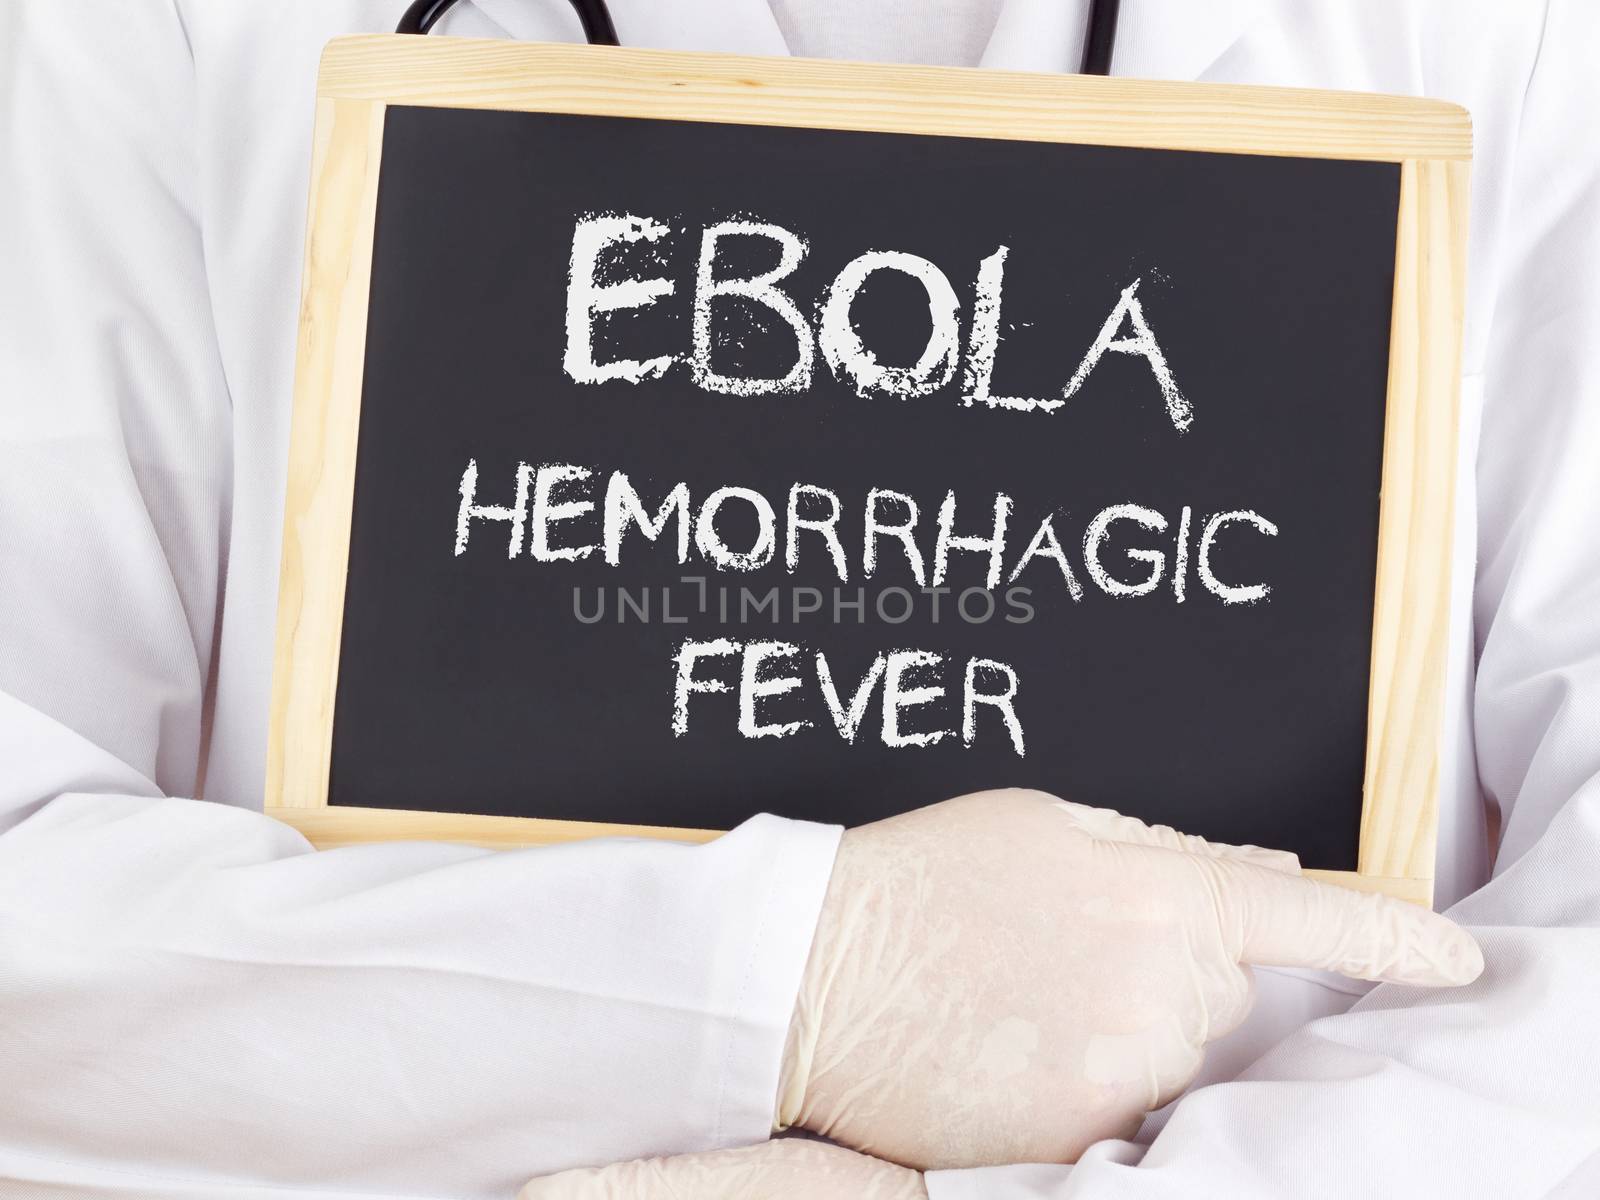 Doctor shows information: Ebola hemorrhagic fever by gwolters